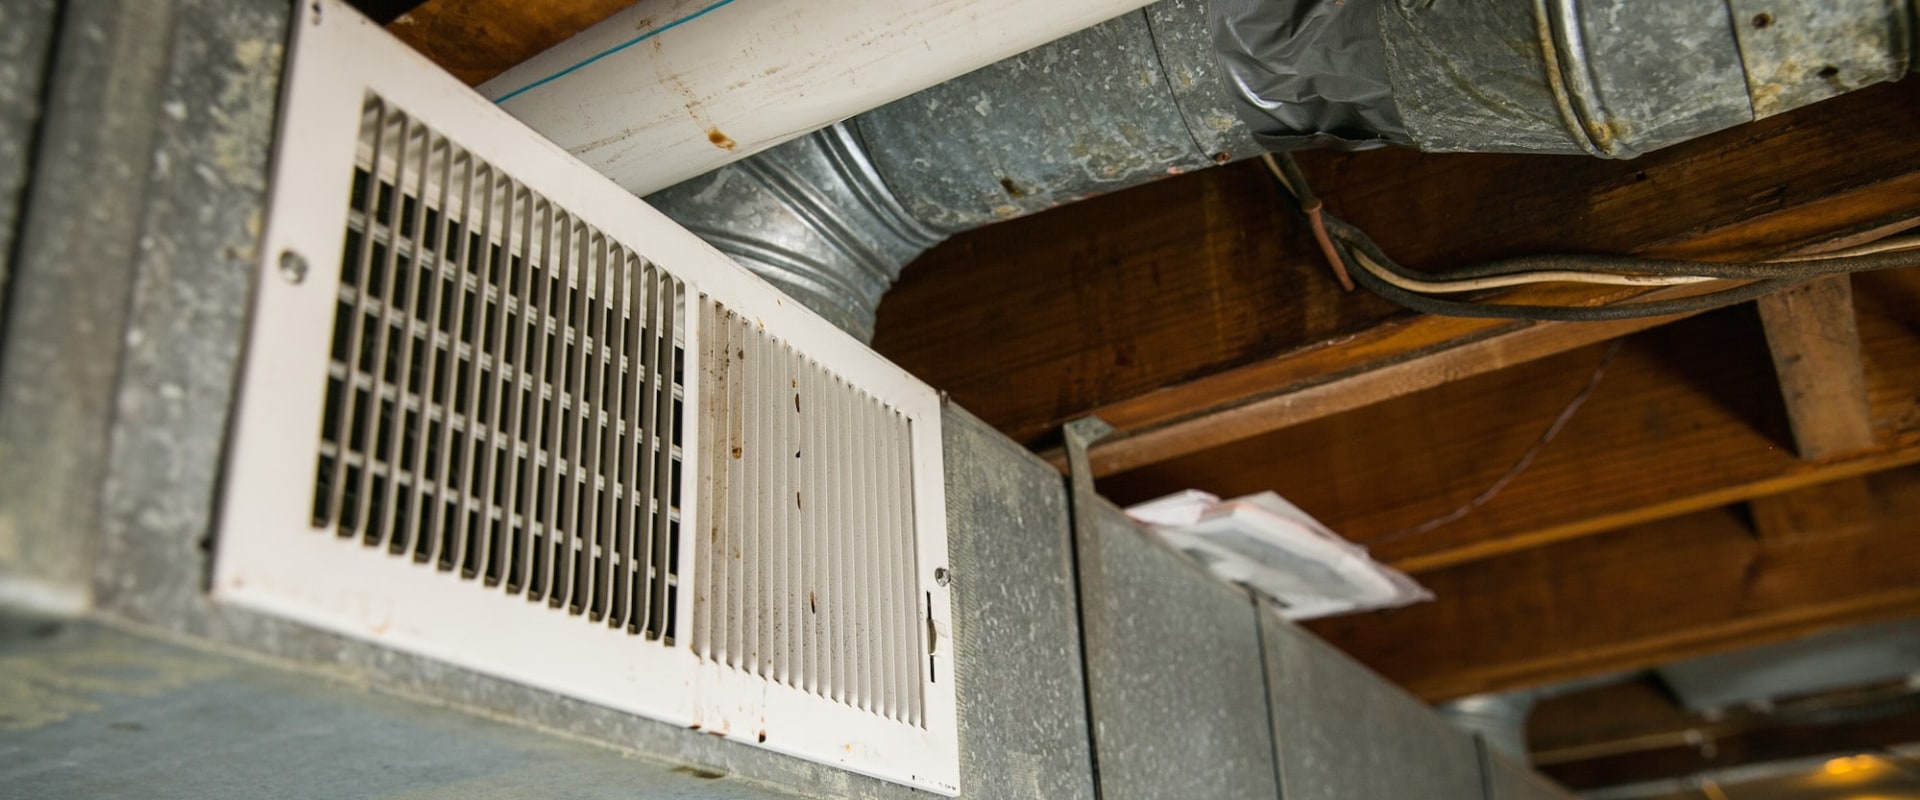 Top 7 Facts On AC Installation Services in Pompano Beach FL